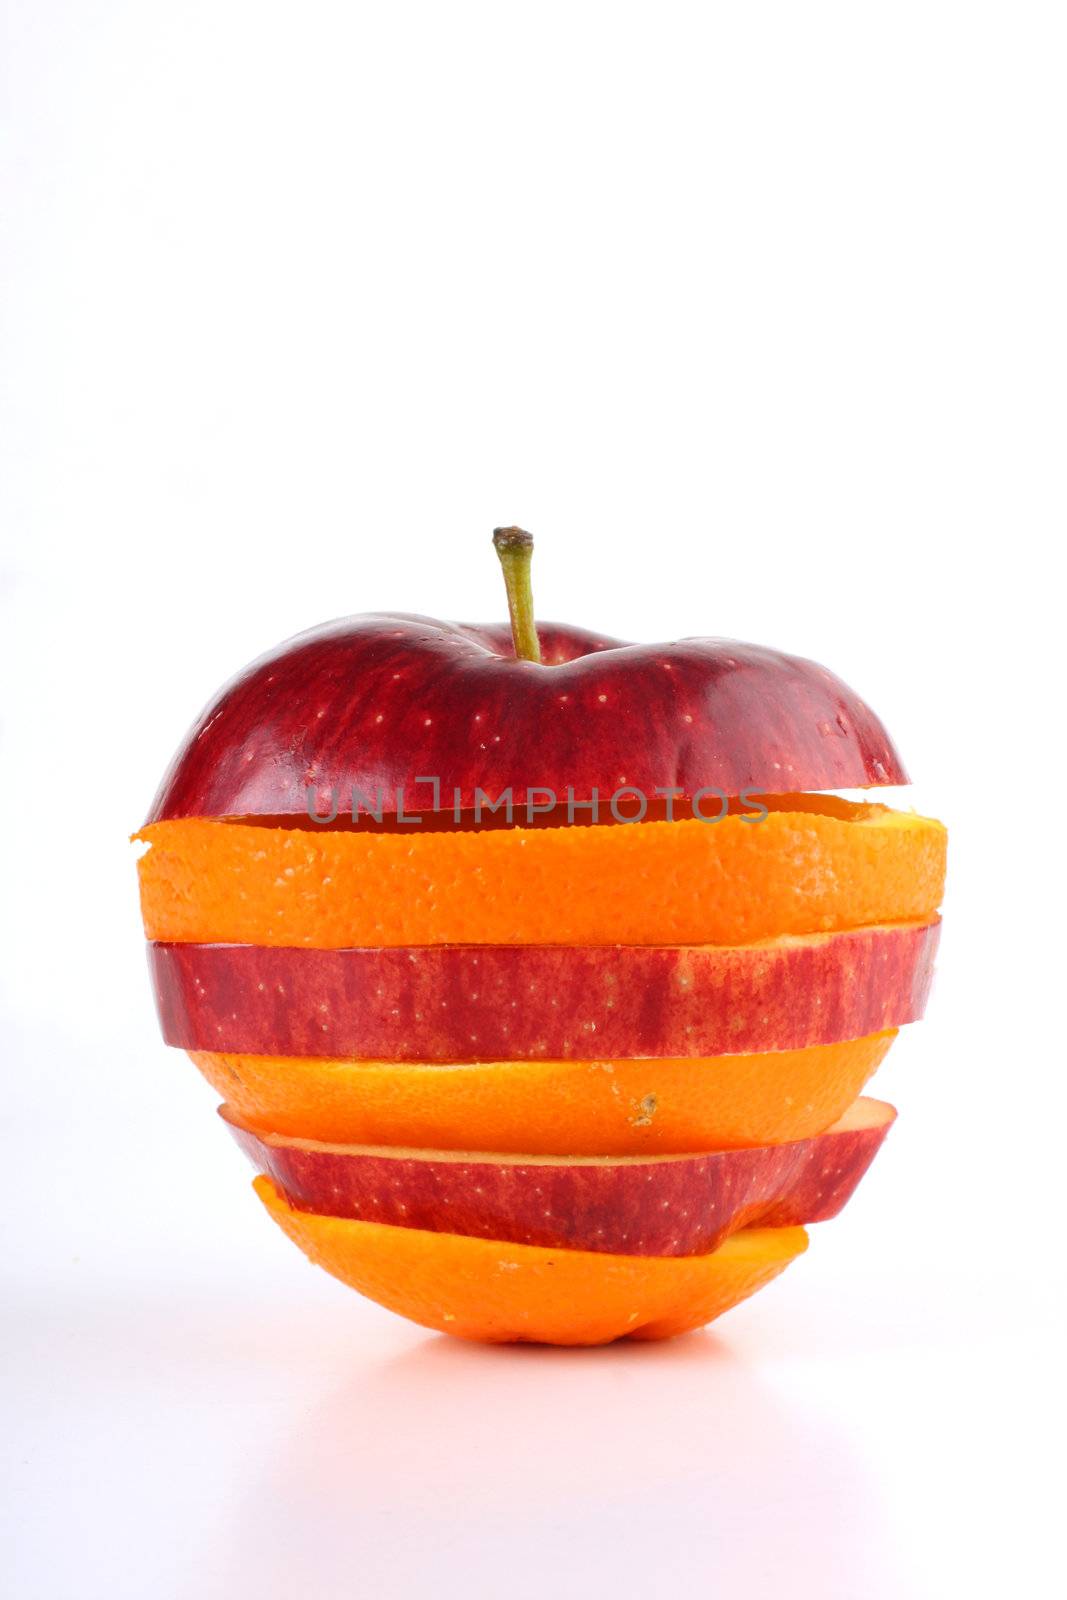 slices of an apple and orange put together to form a hybrid fruit, shot on white in a studio